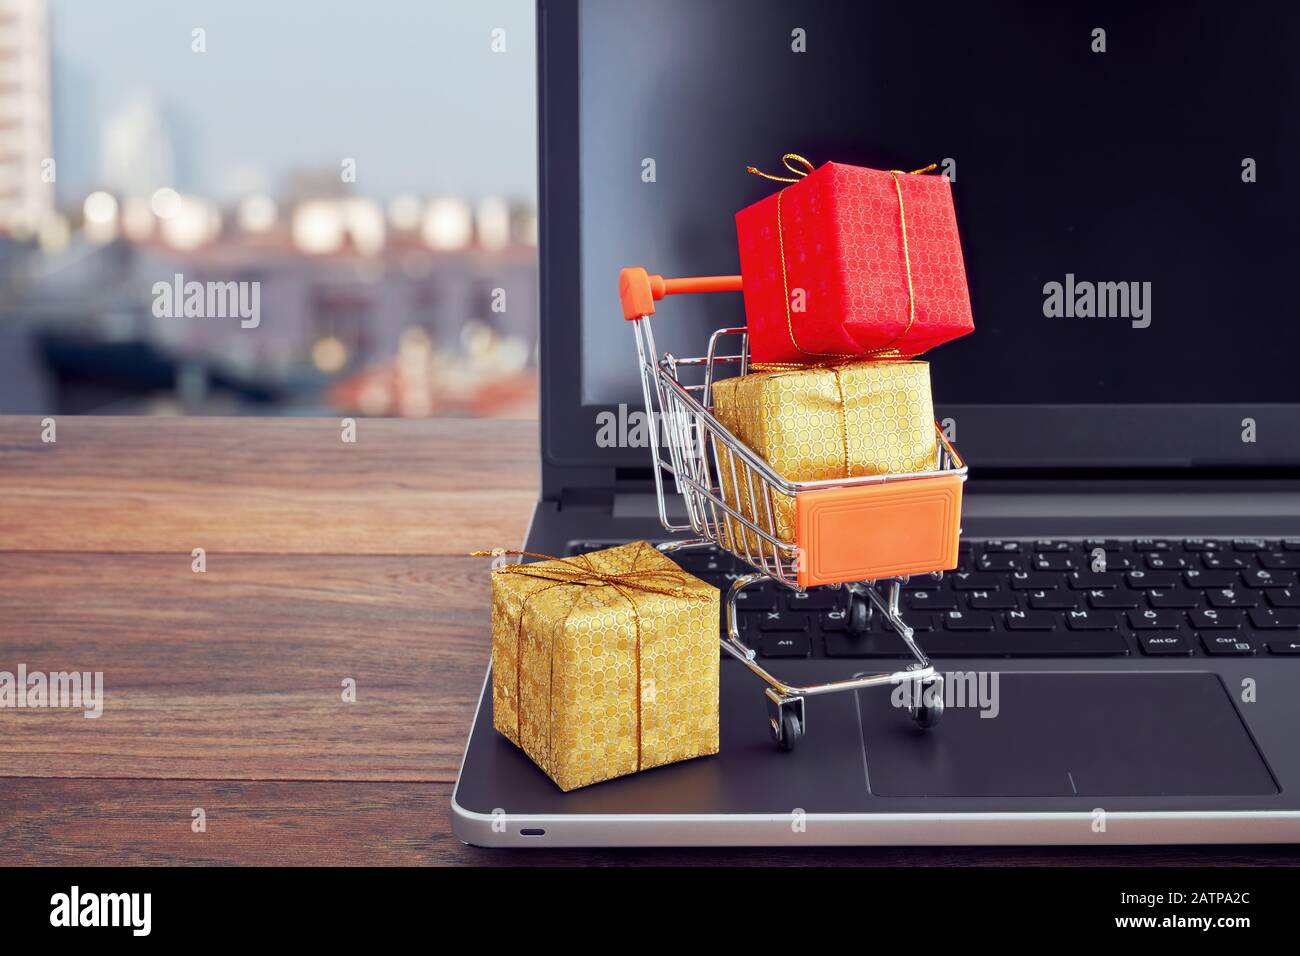 Shopping cart trolley full of colorful gift boxes on a laptop computer. Concept of online shopping for christmas or special days. Stock Photo